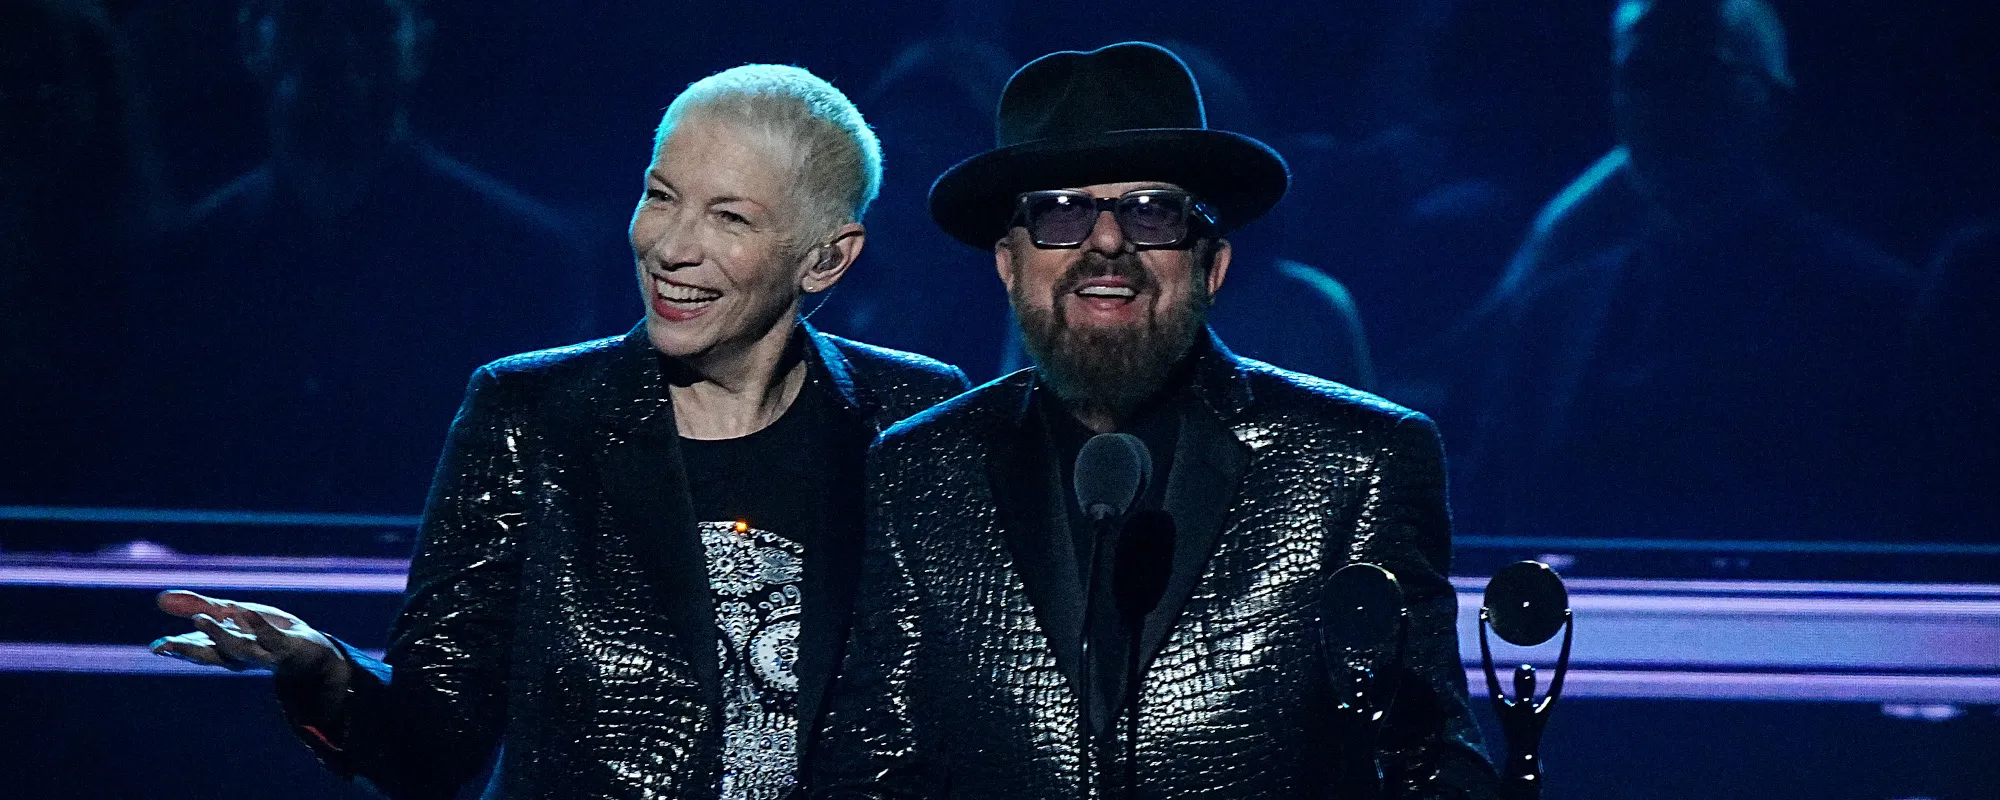 Dave Stewart Reveals Annie Lennox is Done Touring for Eurythmics